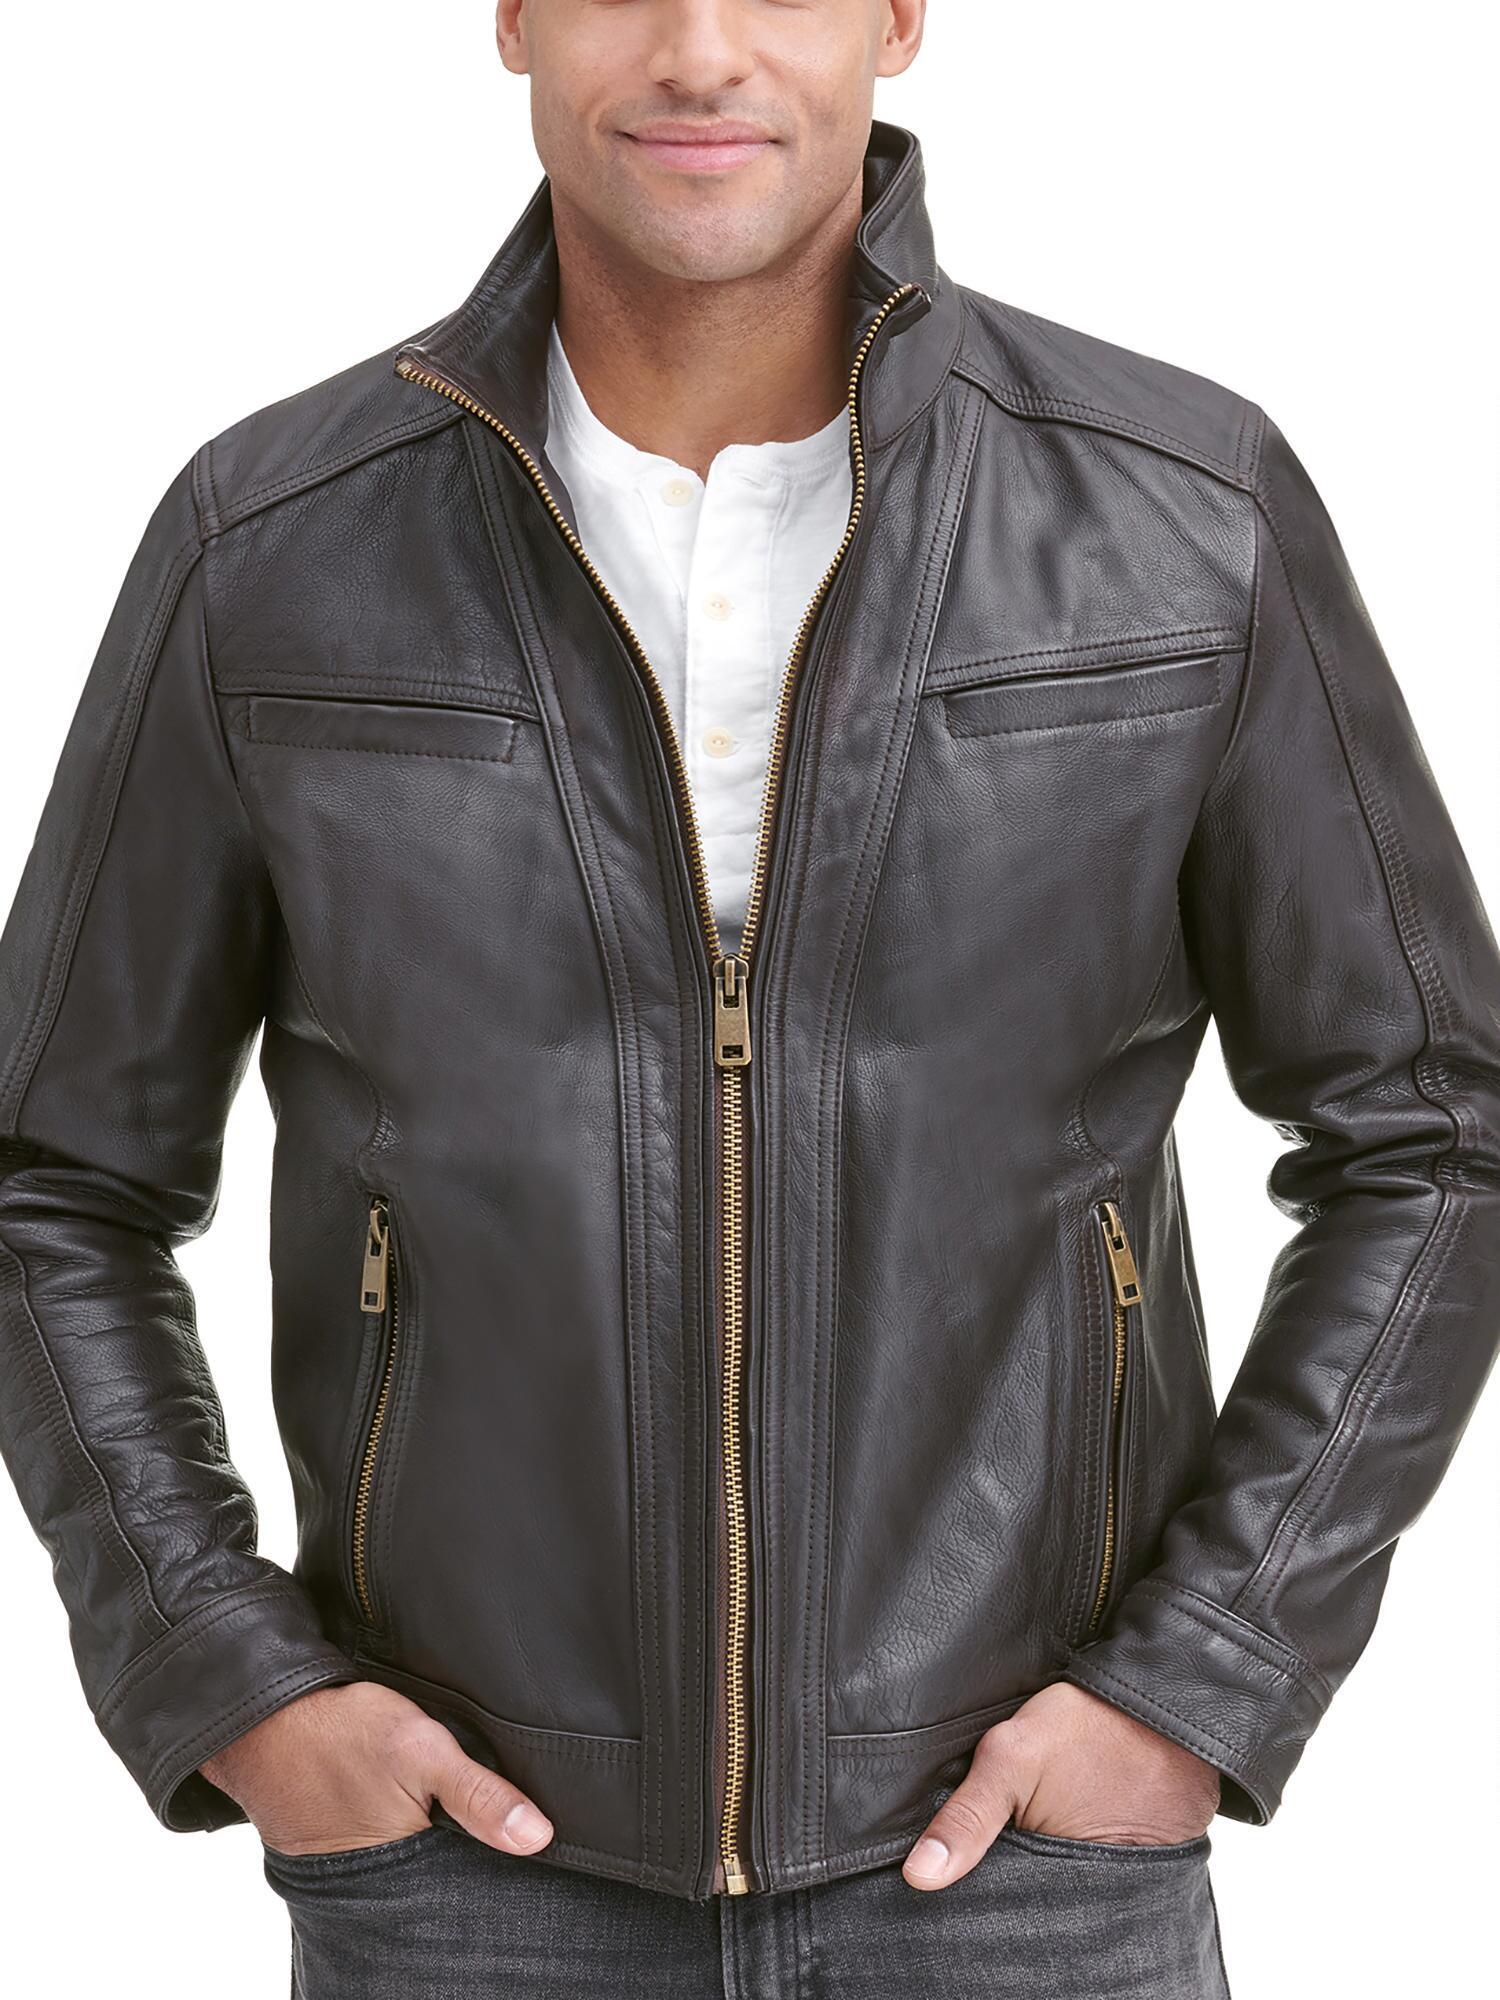 Wilsons Leather Sean Vintage Leather Jacket in Brown for Men - Lyst